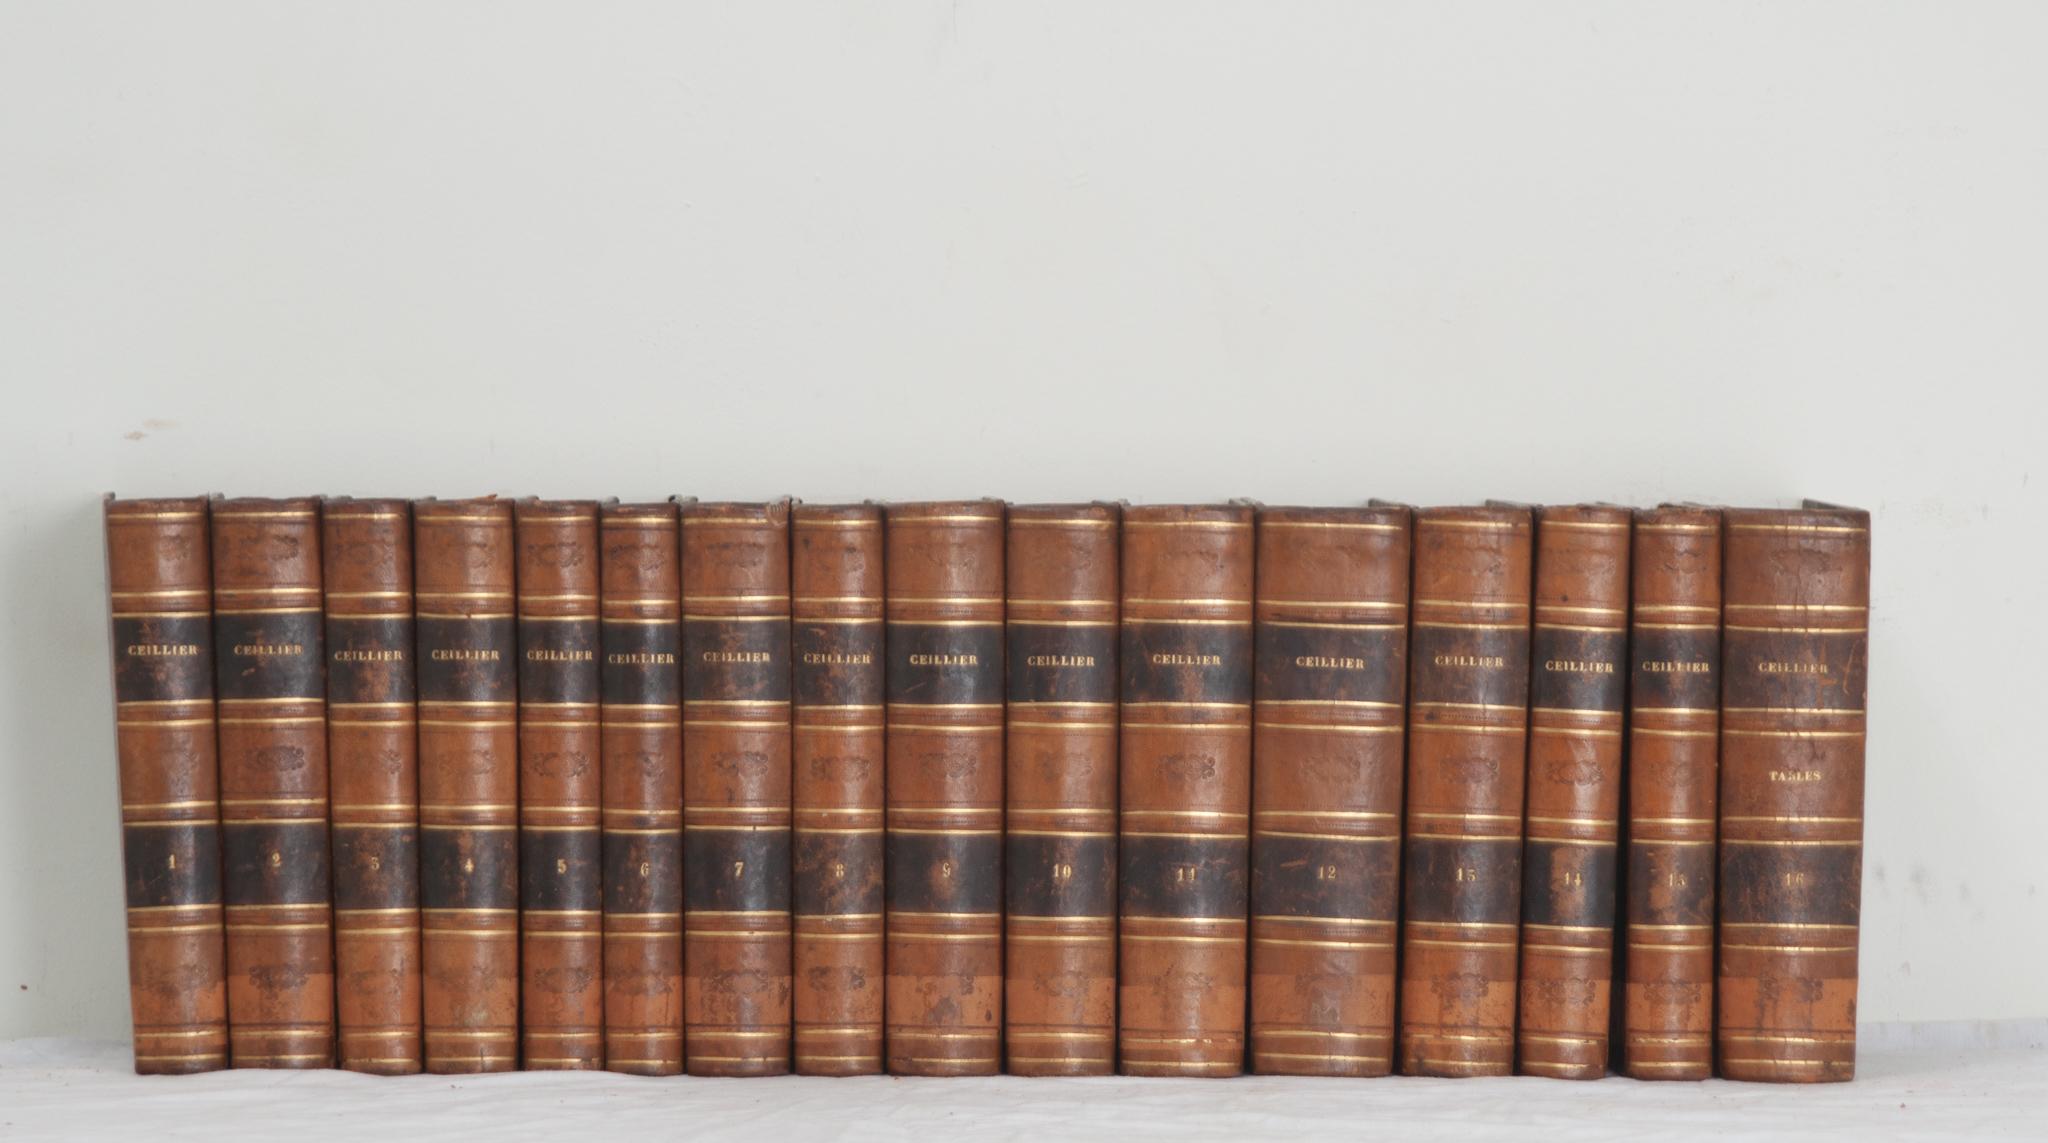 Other Set of 16 French 19th Century History Books